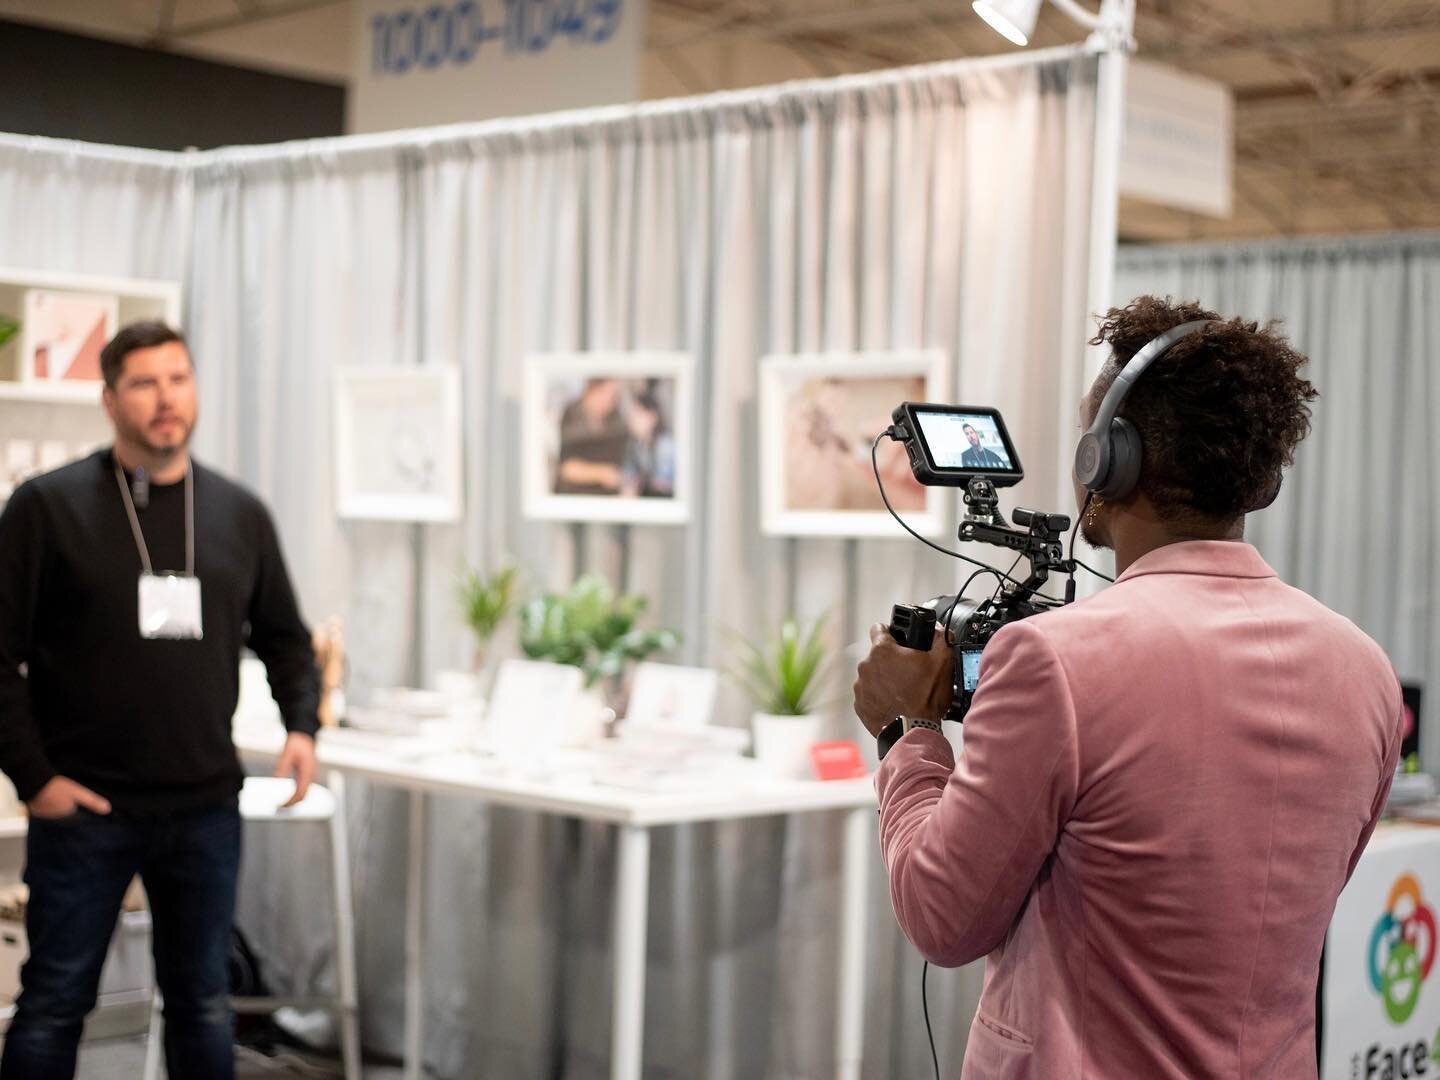 Man &lsquo;o man I love me some candid images! 

Here we have a behind the scenes look of Judah (owner @blackandwhitemedia) working his magic with a vendor from @cangift trade show. 

Marketing assets at its finest through high quality visuals friend